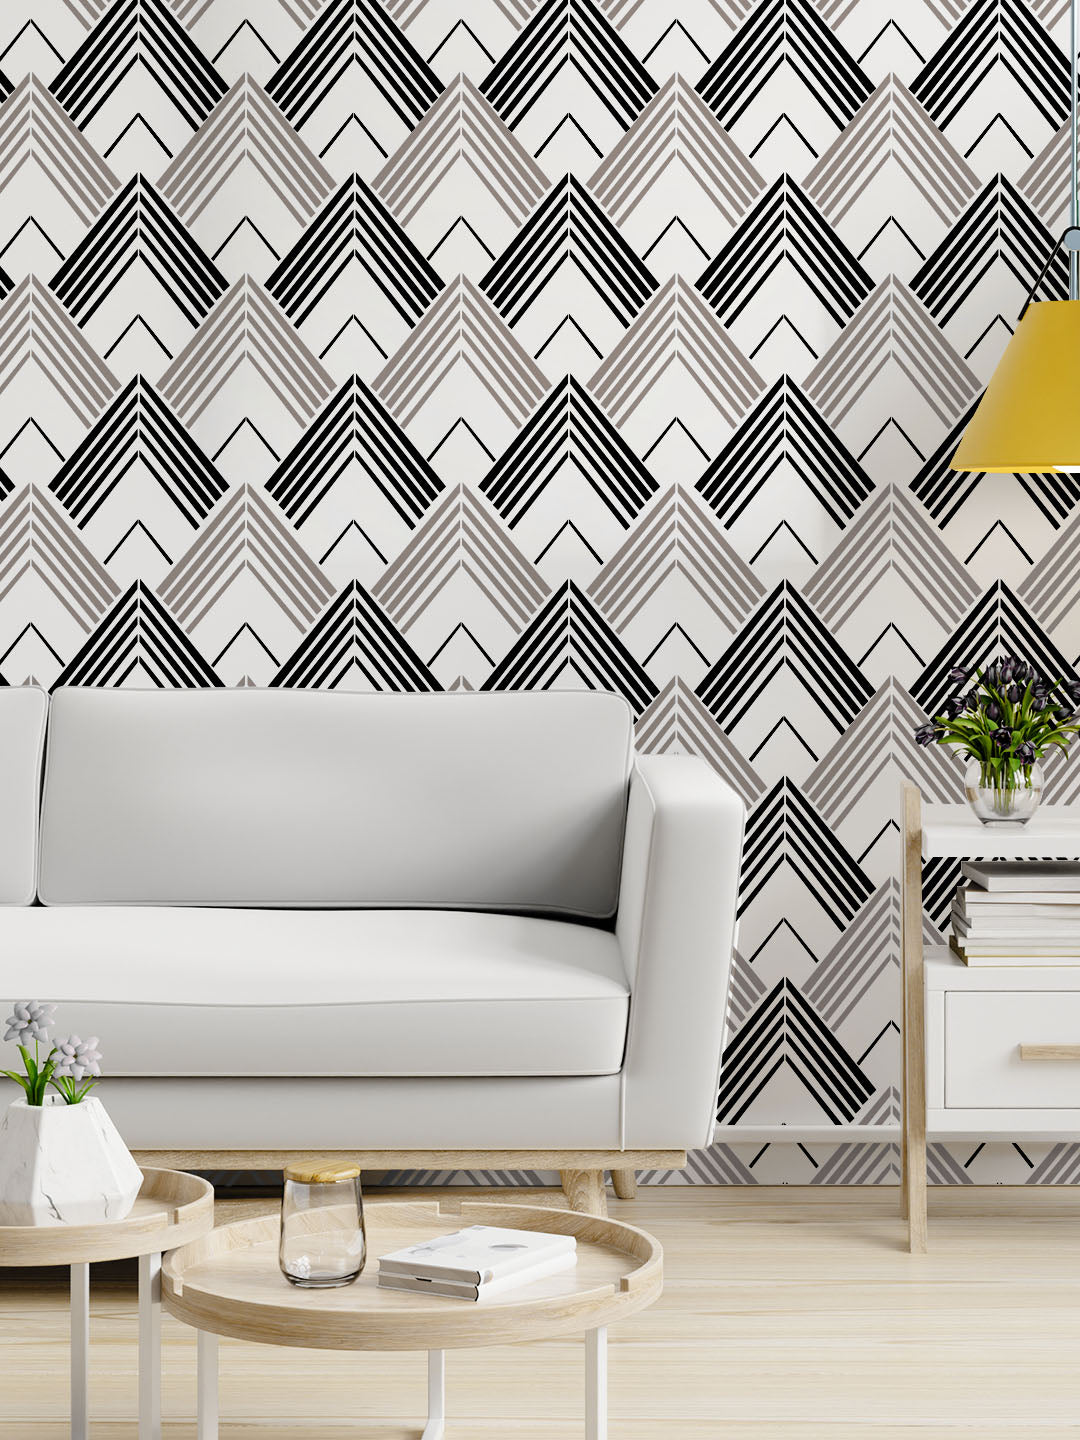 Pyramid Pattern Design Stencil for Wall Painting (KDMD1458)